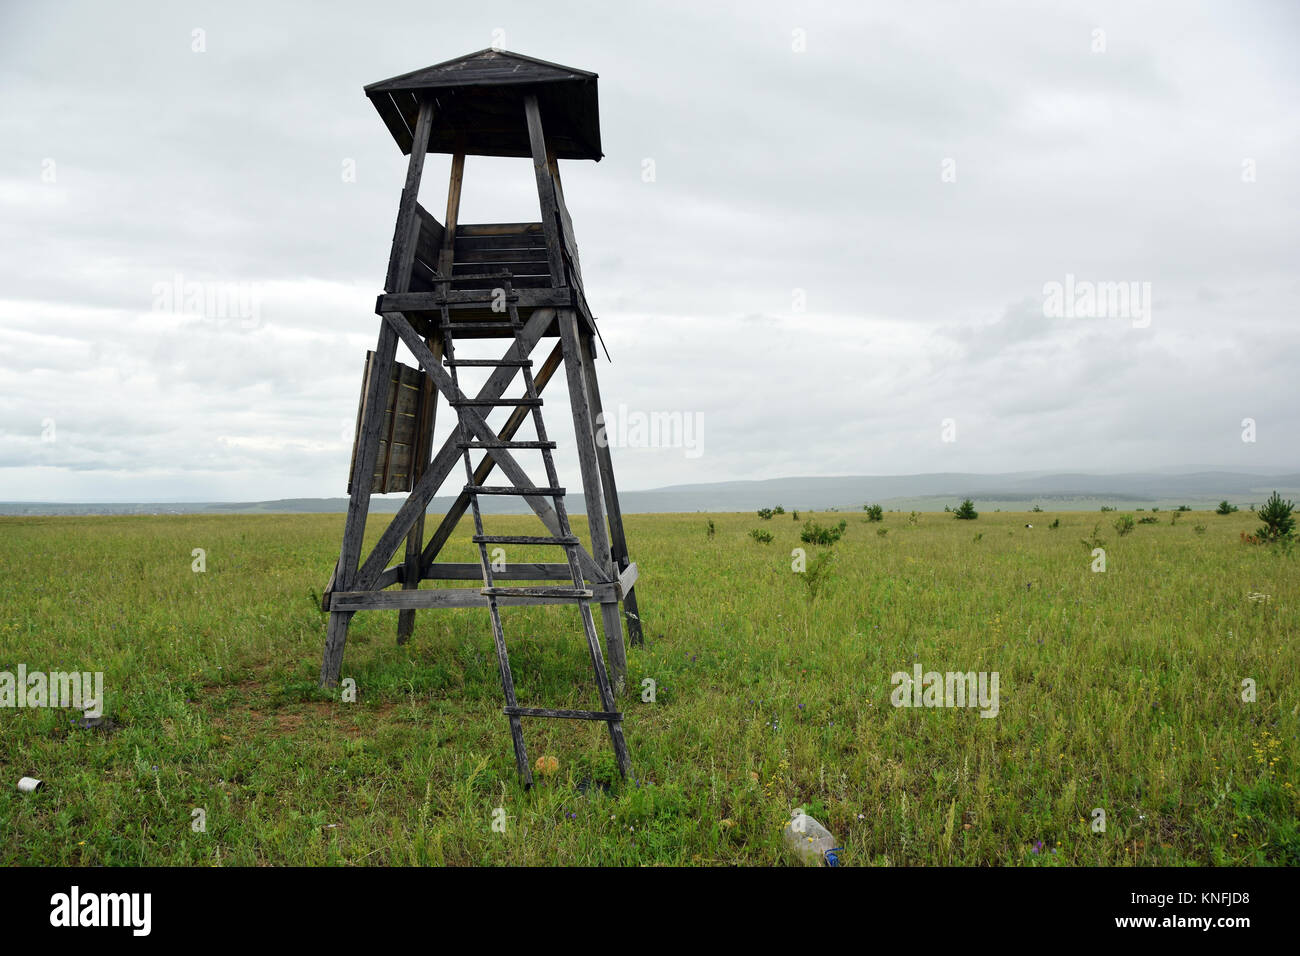 A mirador in the countryside in Siberia near the town of Chita. Stock Photo